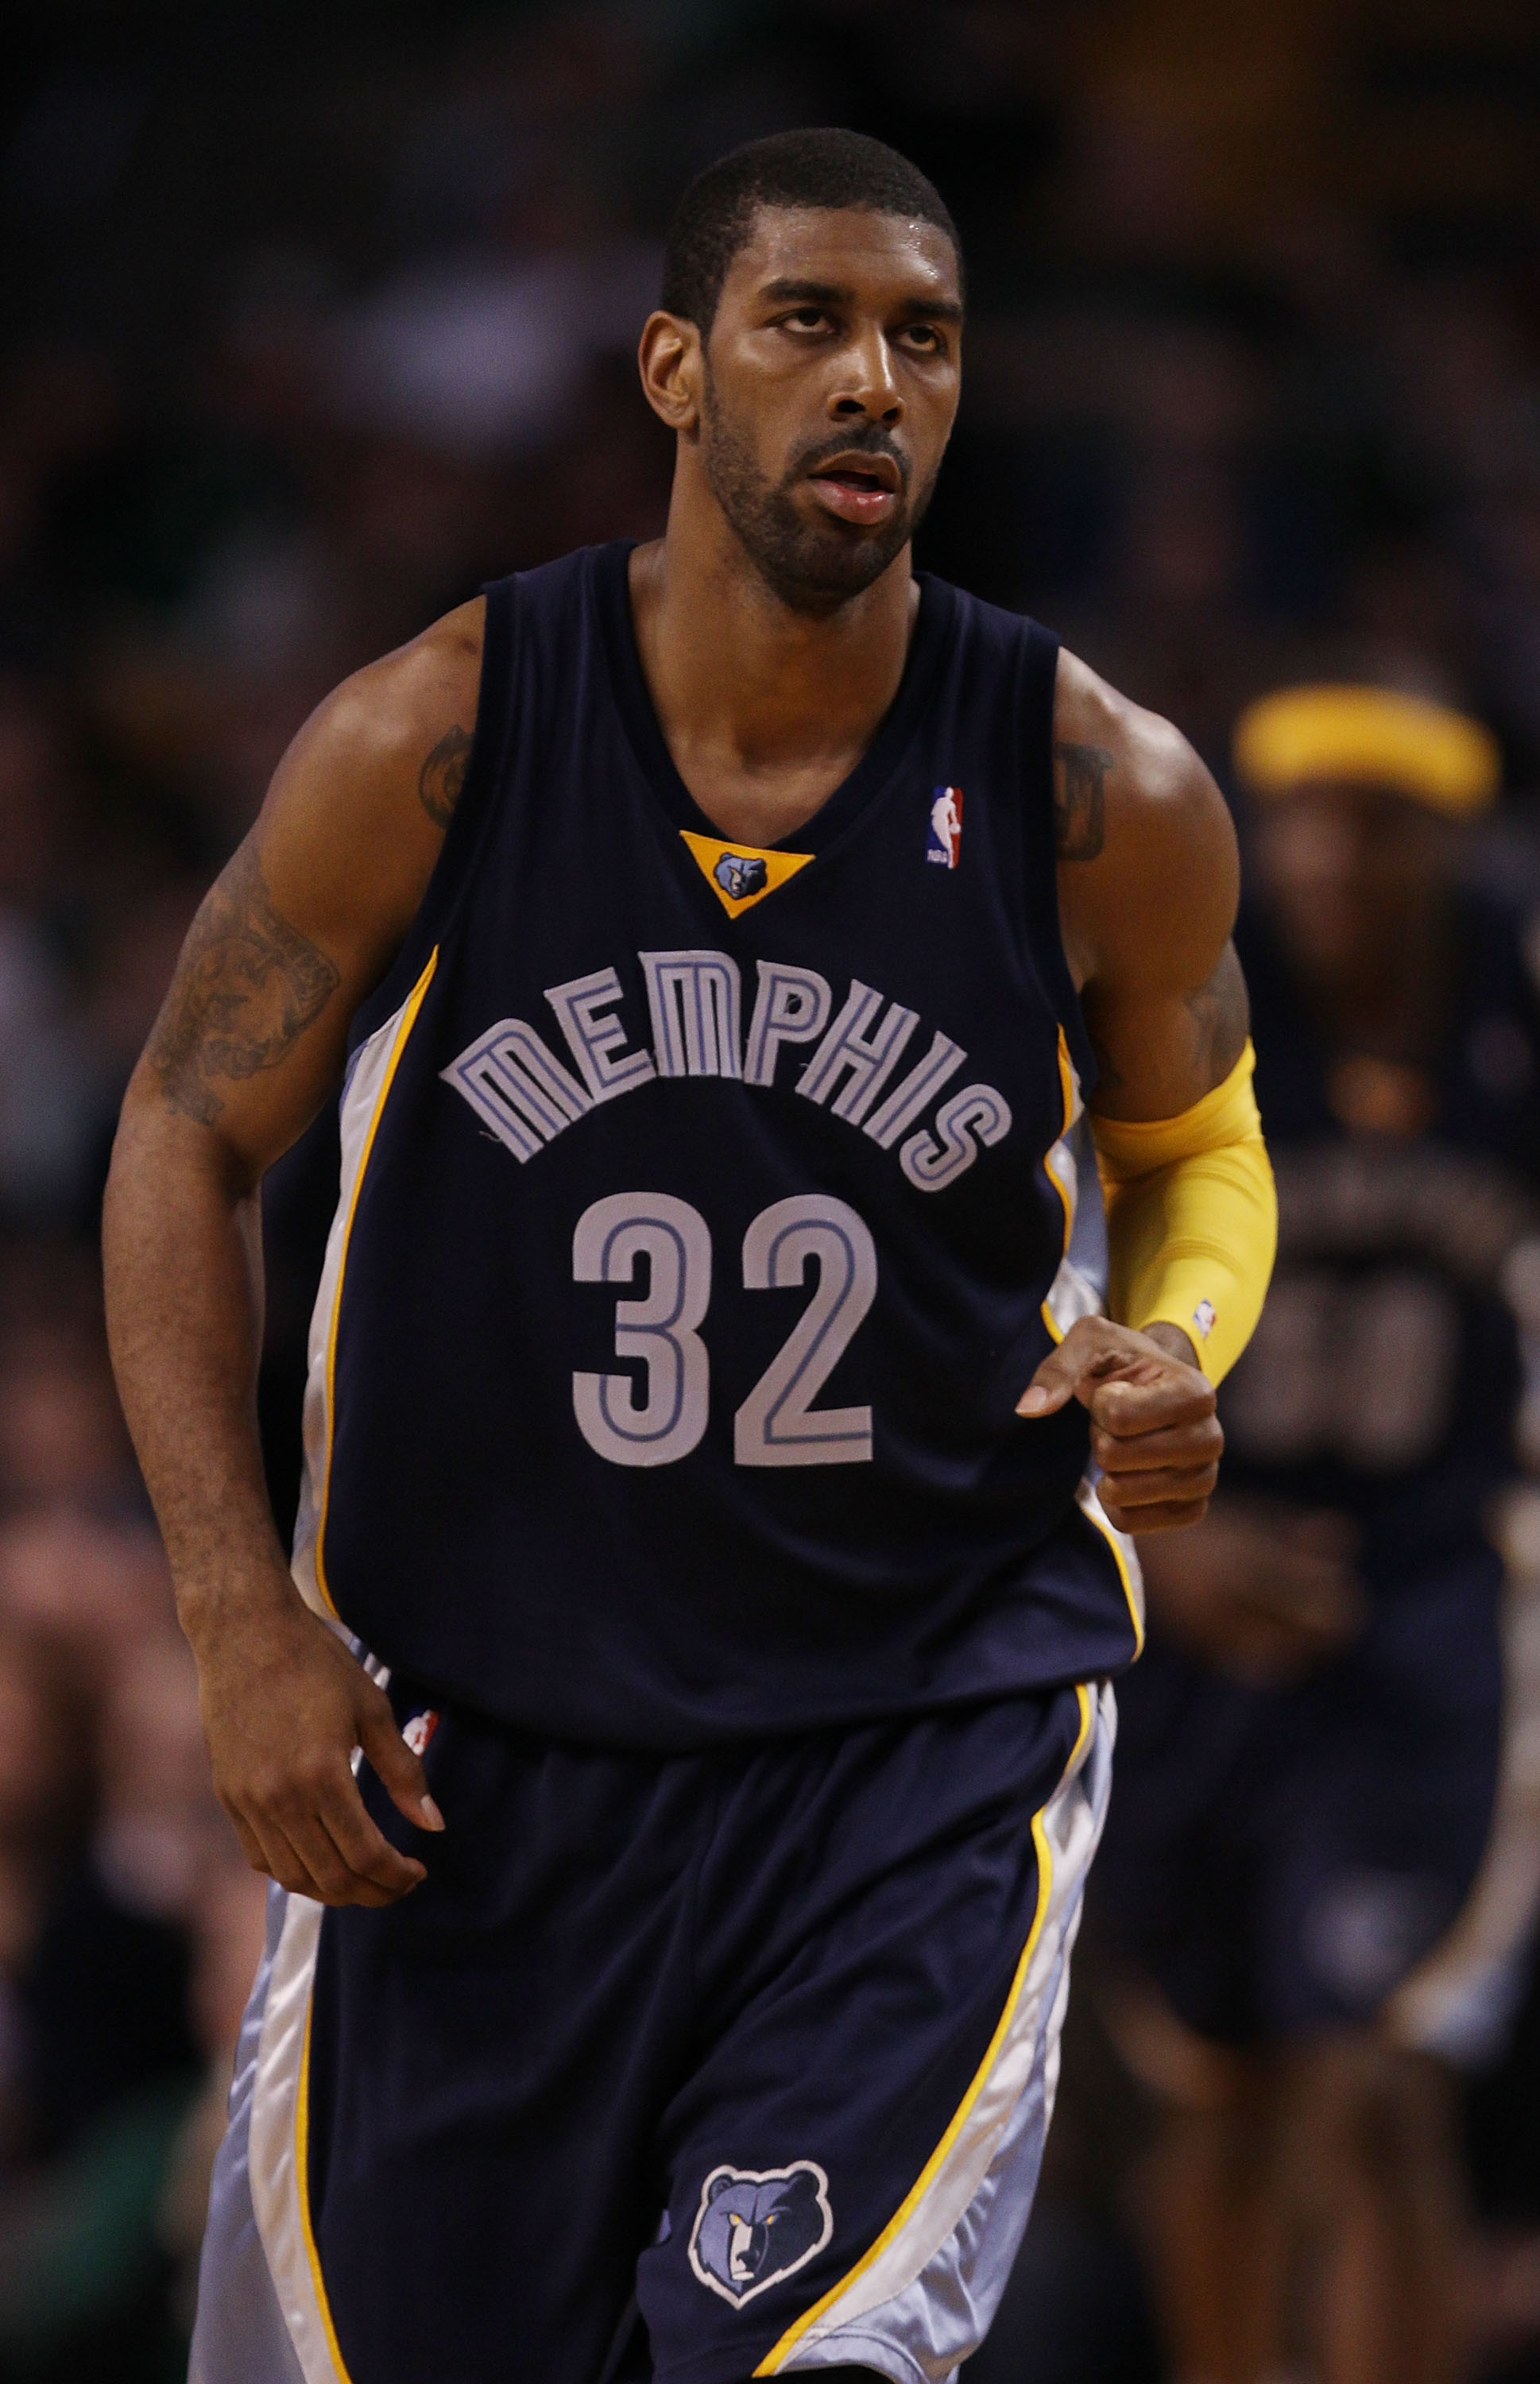 BOSTON - MARCH 10:  O.J. Mayo #32 of the Memphis Grizzlies celebrates his three point shot in the second half against the Boston Celtics  on March 10, 2010 at the TD Garden in Boston, Massachusetts. The Grizzlies defeated the Celtics 111-91. NOTE TO USER: